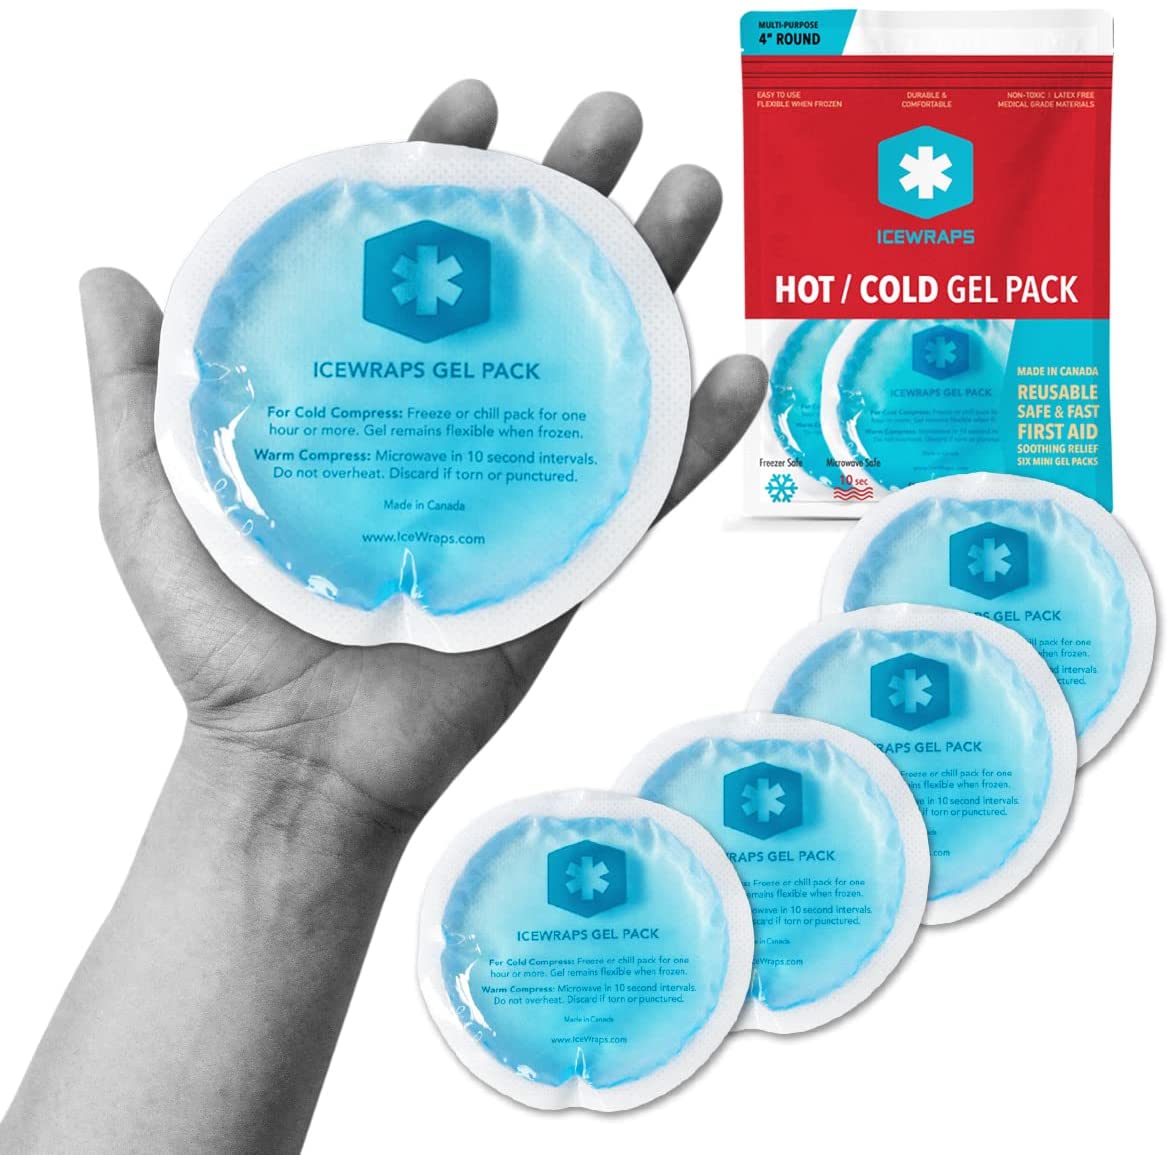 Mini Hot & Cold Gel Pack from Camerons Products